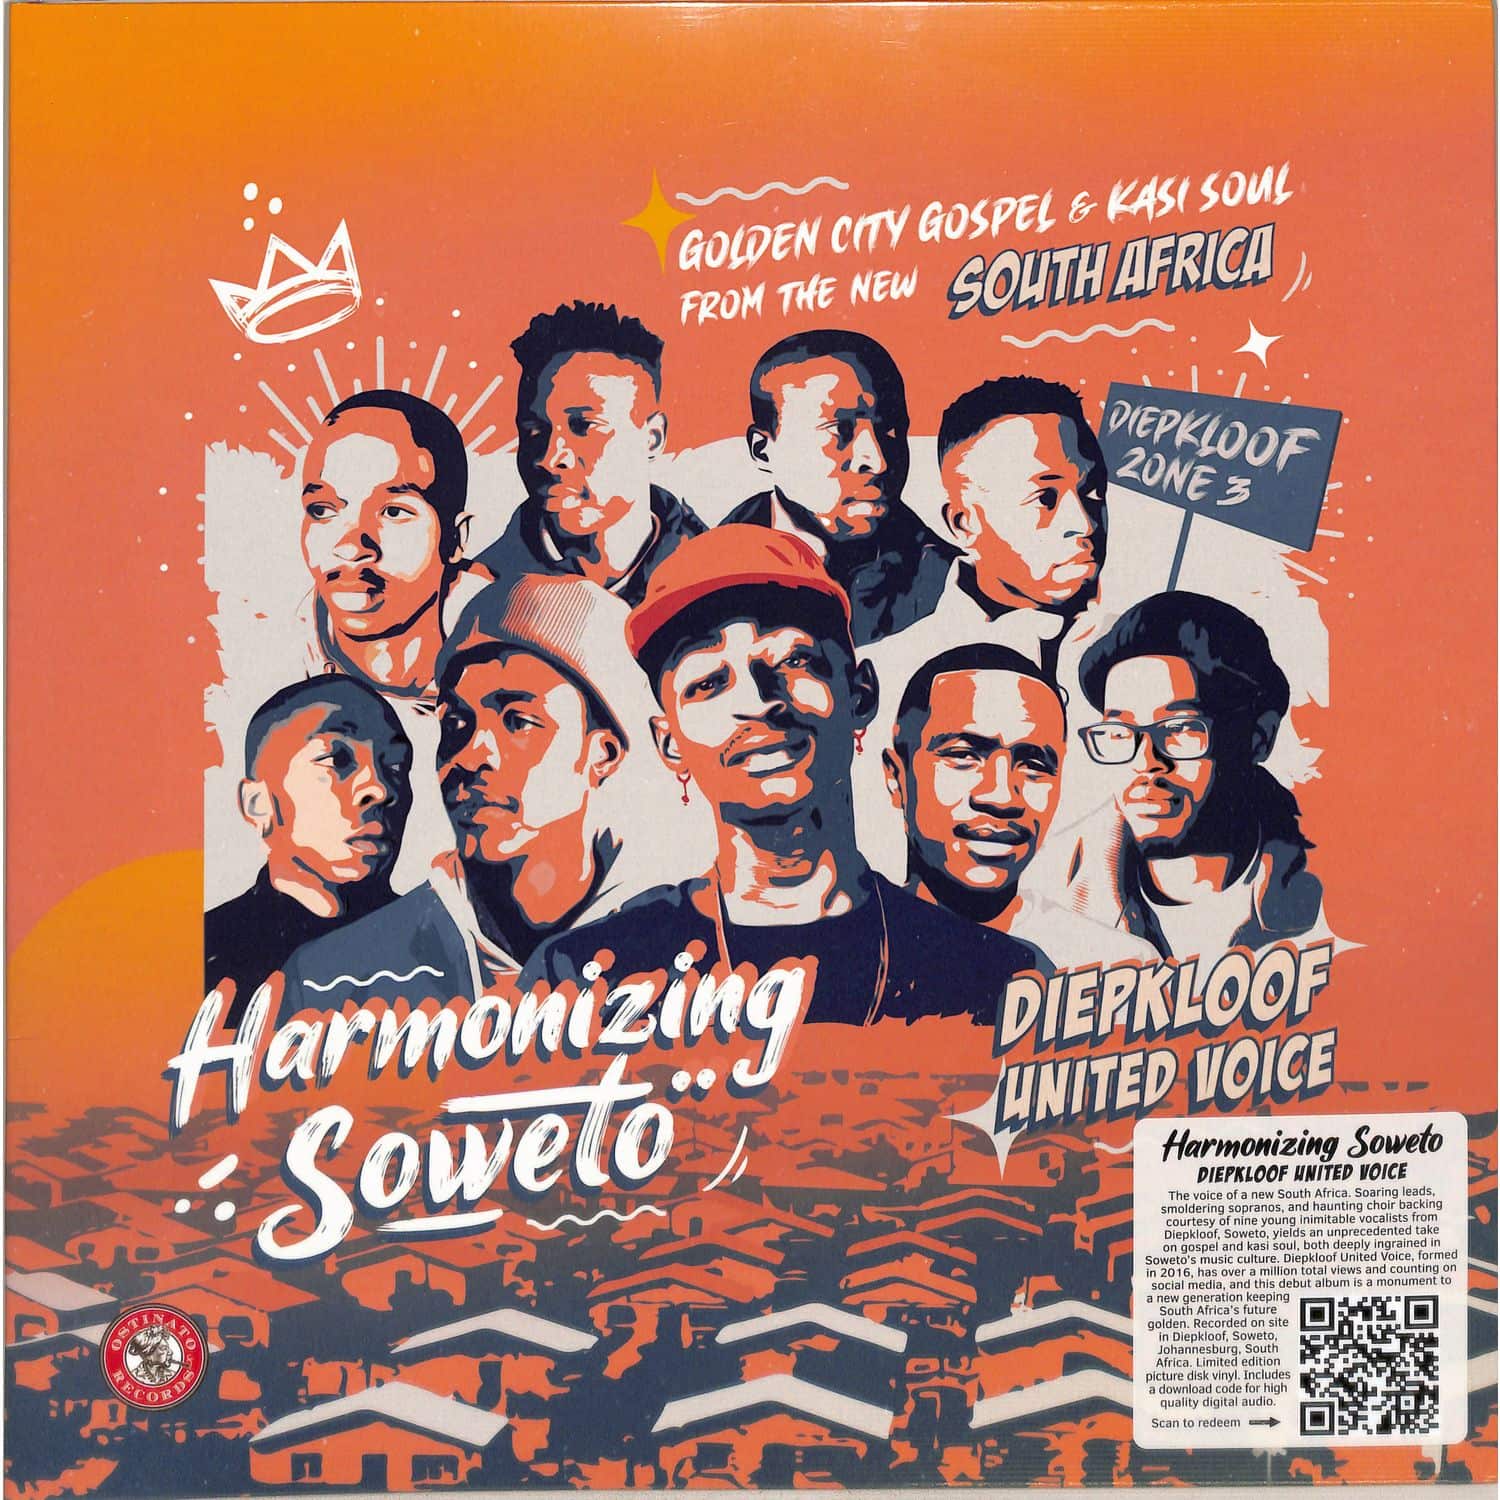 Diepkloof United Voice - HARMONIZING SOWETO: GOLDEN CITY GOSPEL & KASI SOUL FROM THE NEW SOUTH AFRICA 